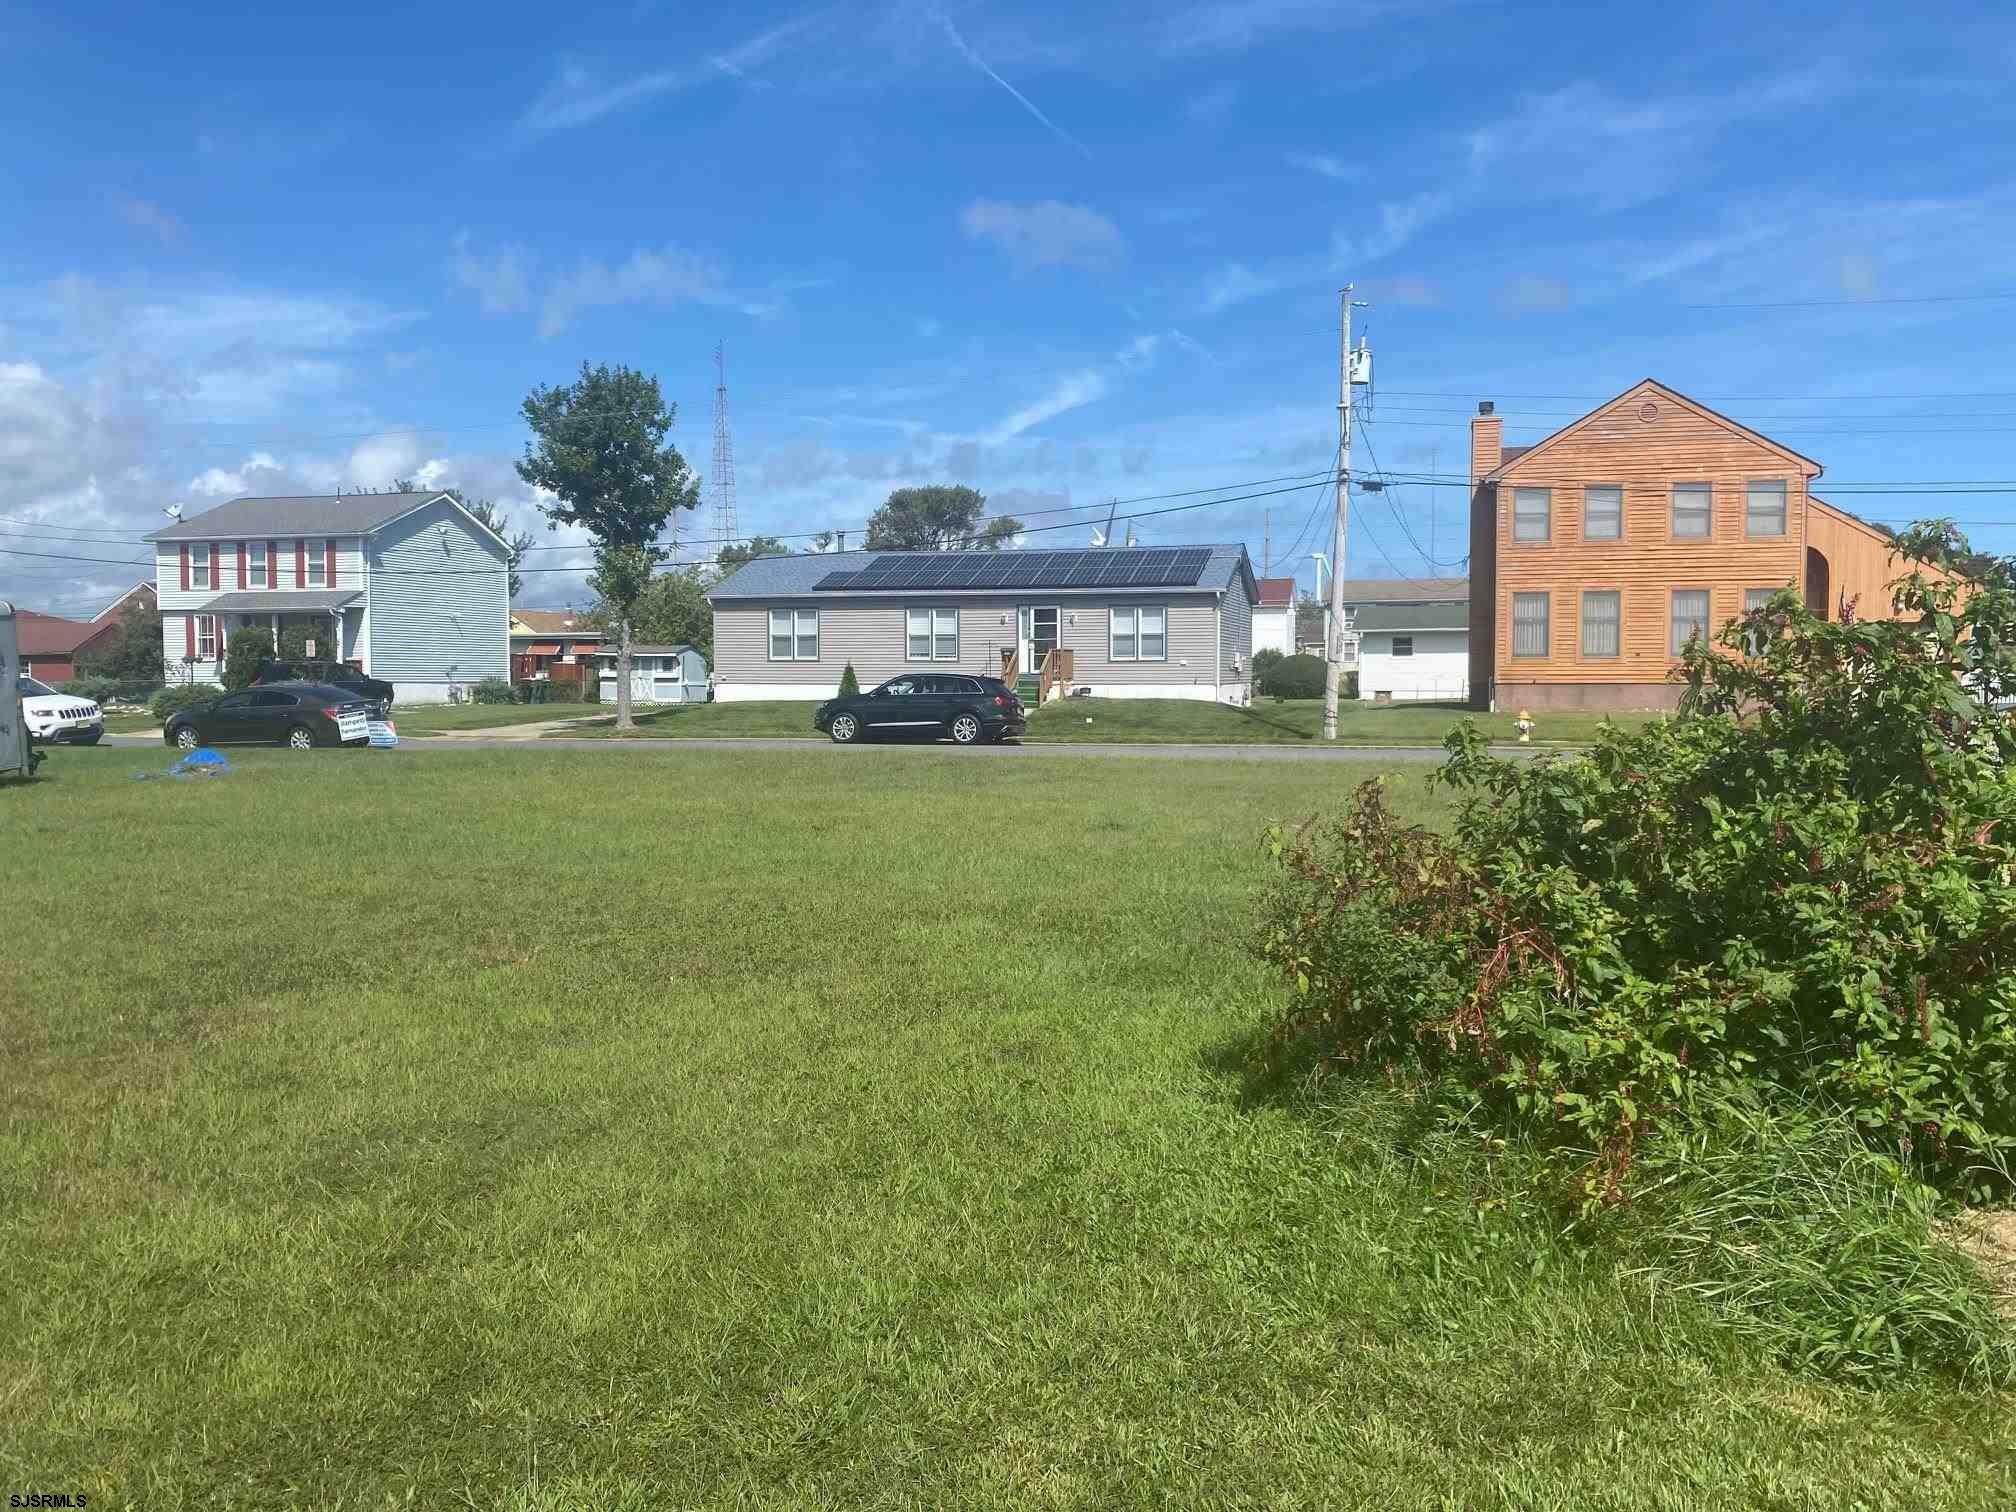 7. Land for Sale at 1614 N Missouri Avenue Avenue Atlantic City, New Jersey 08401 United States